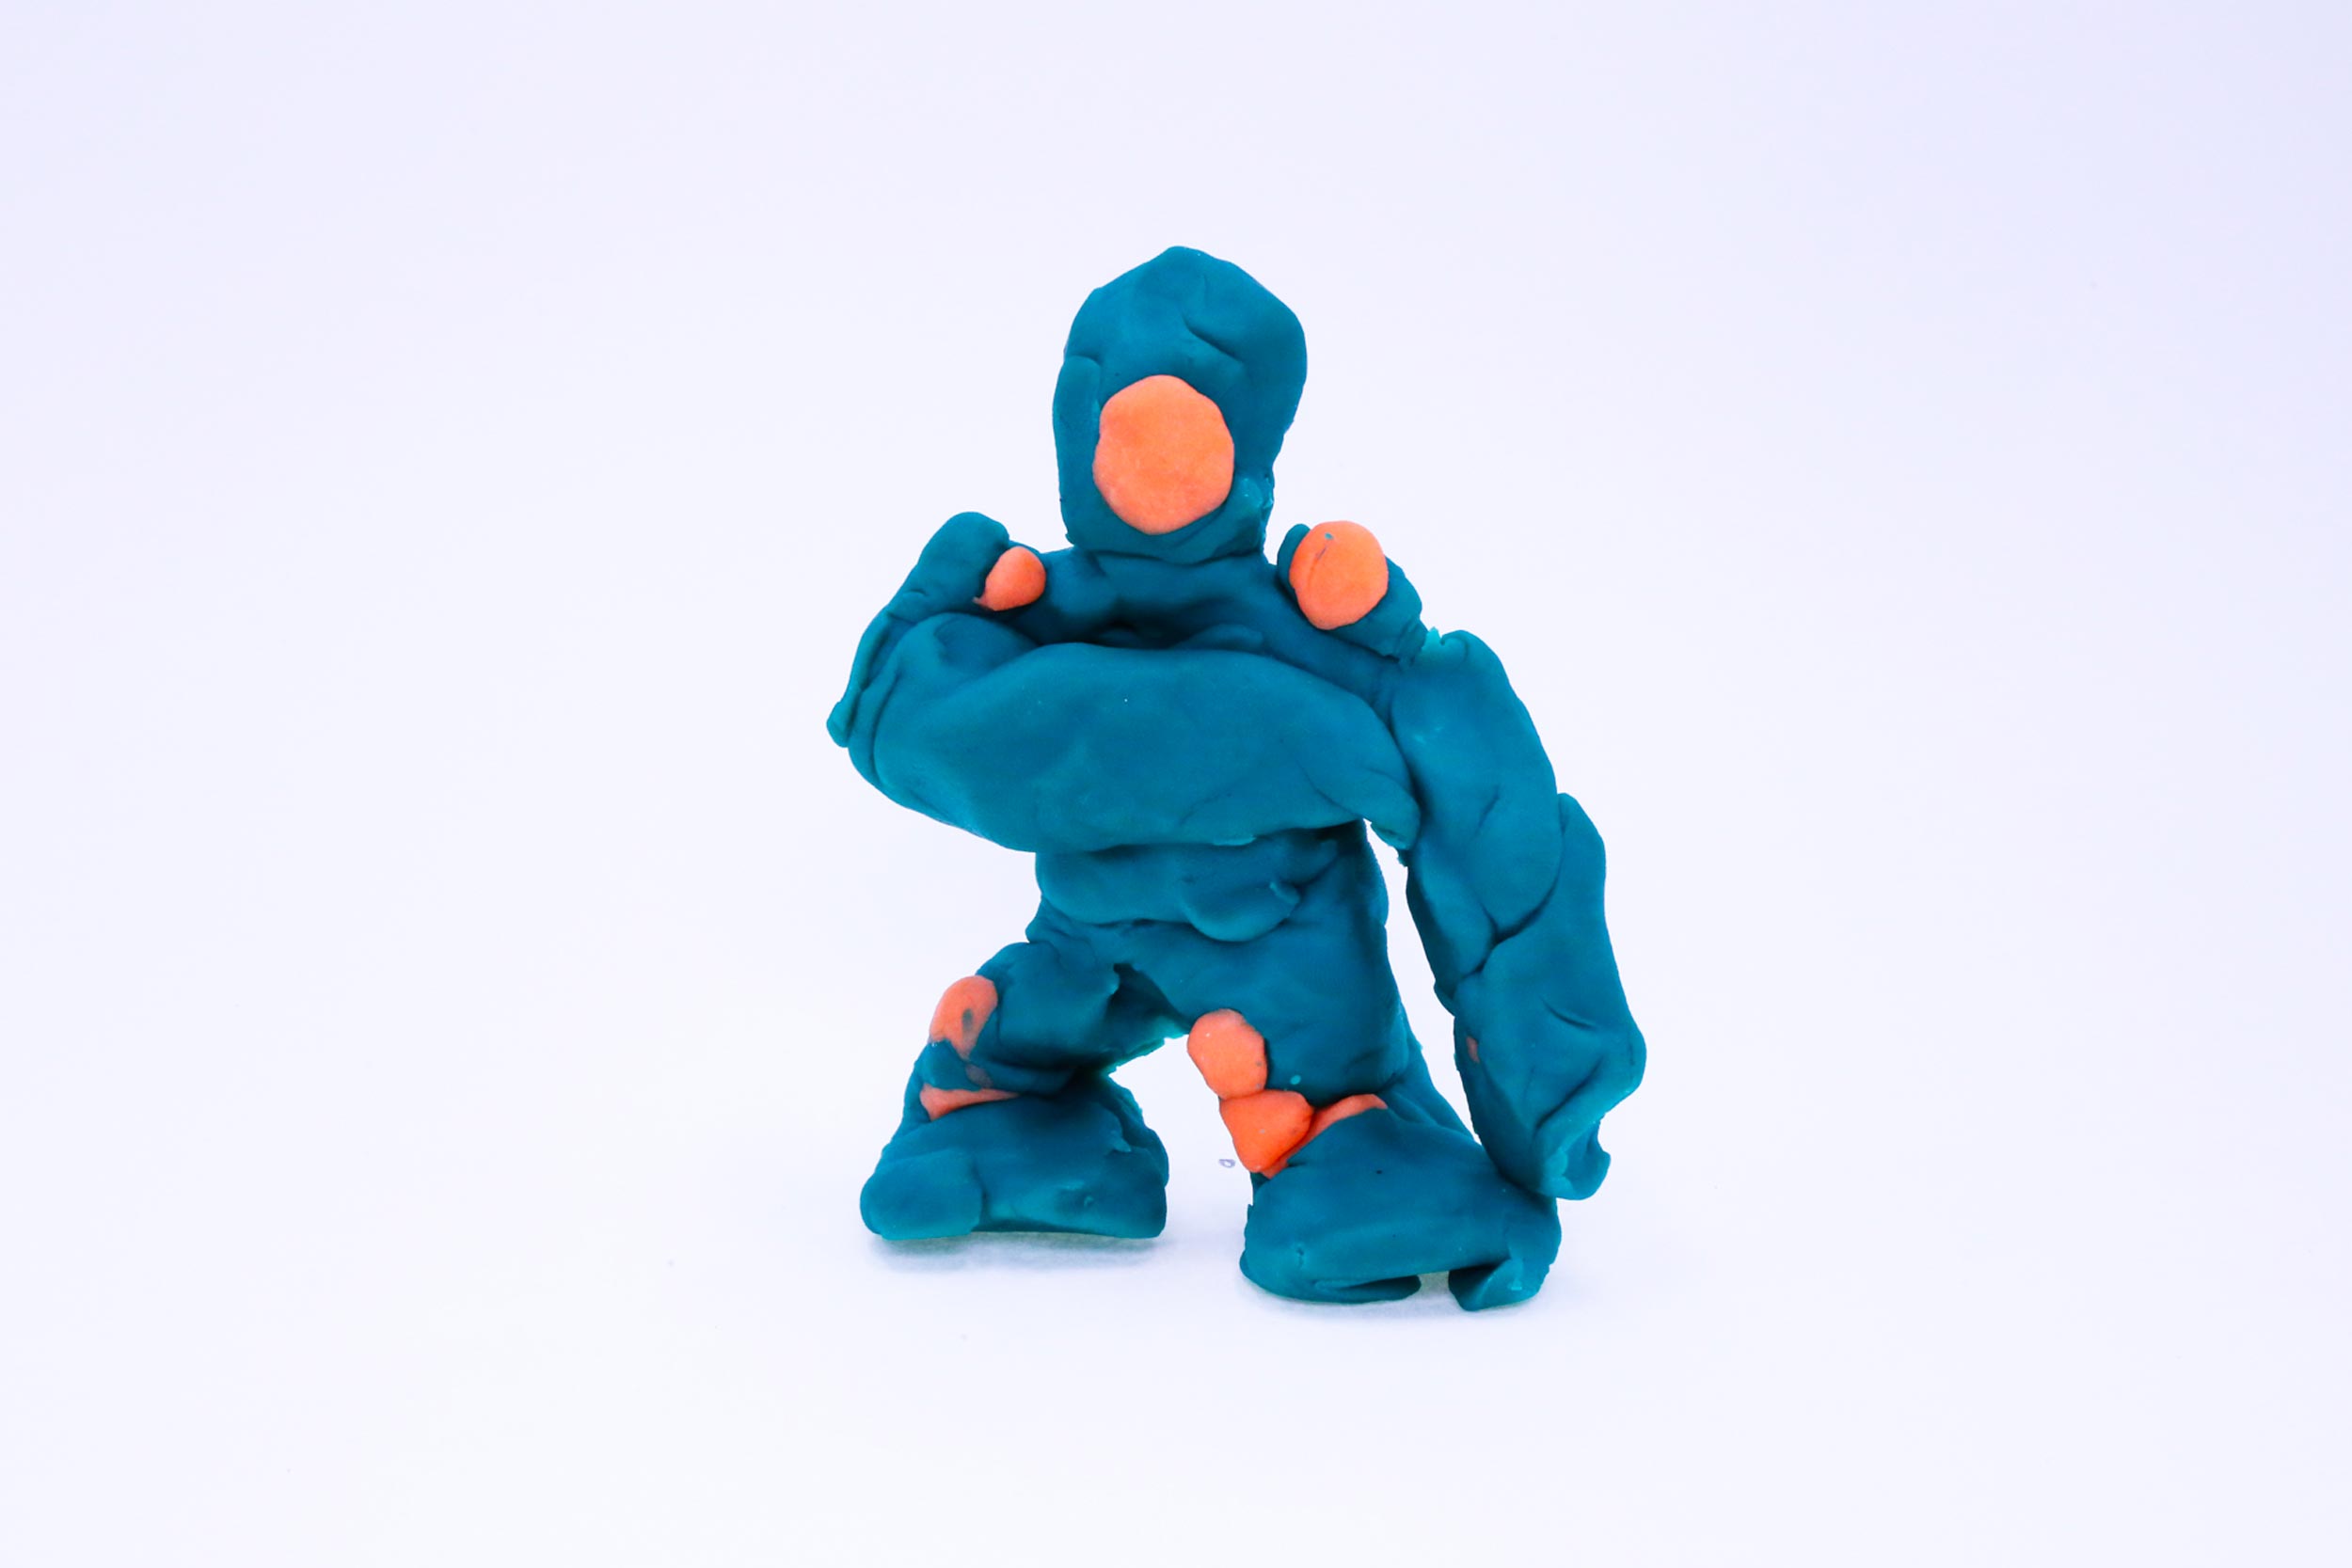 One Eye is a blue and orange play-dough scuplture that features missiles and laser beam eyes.